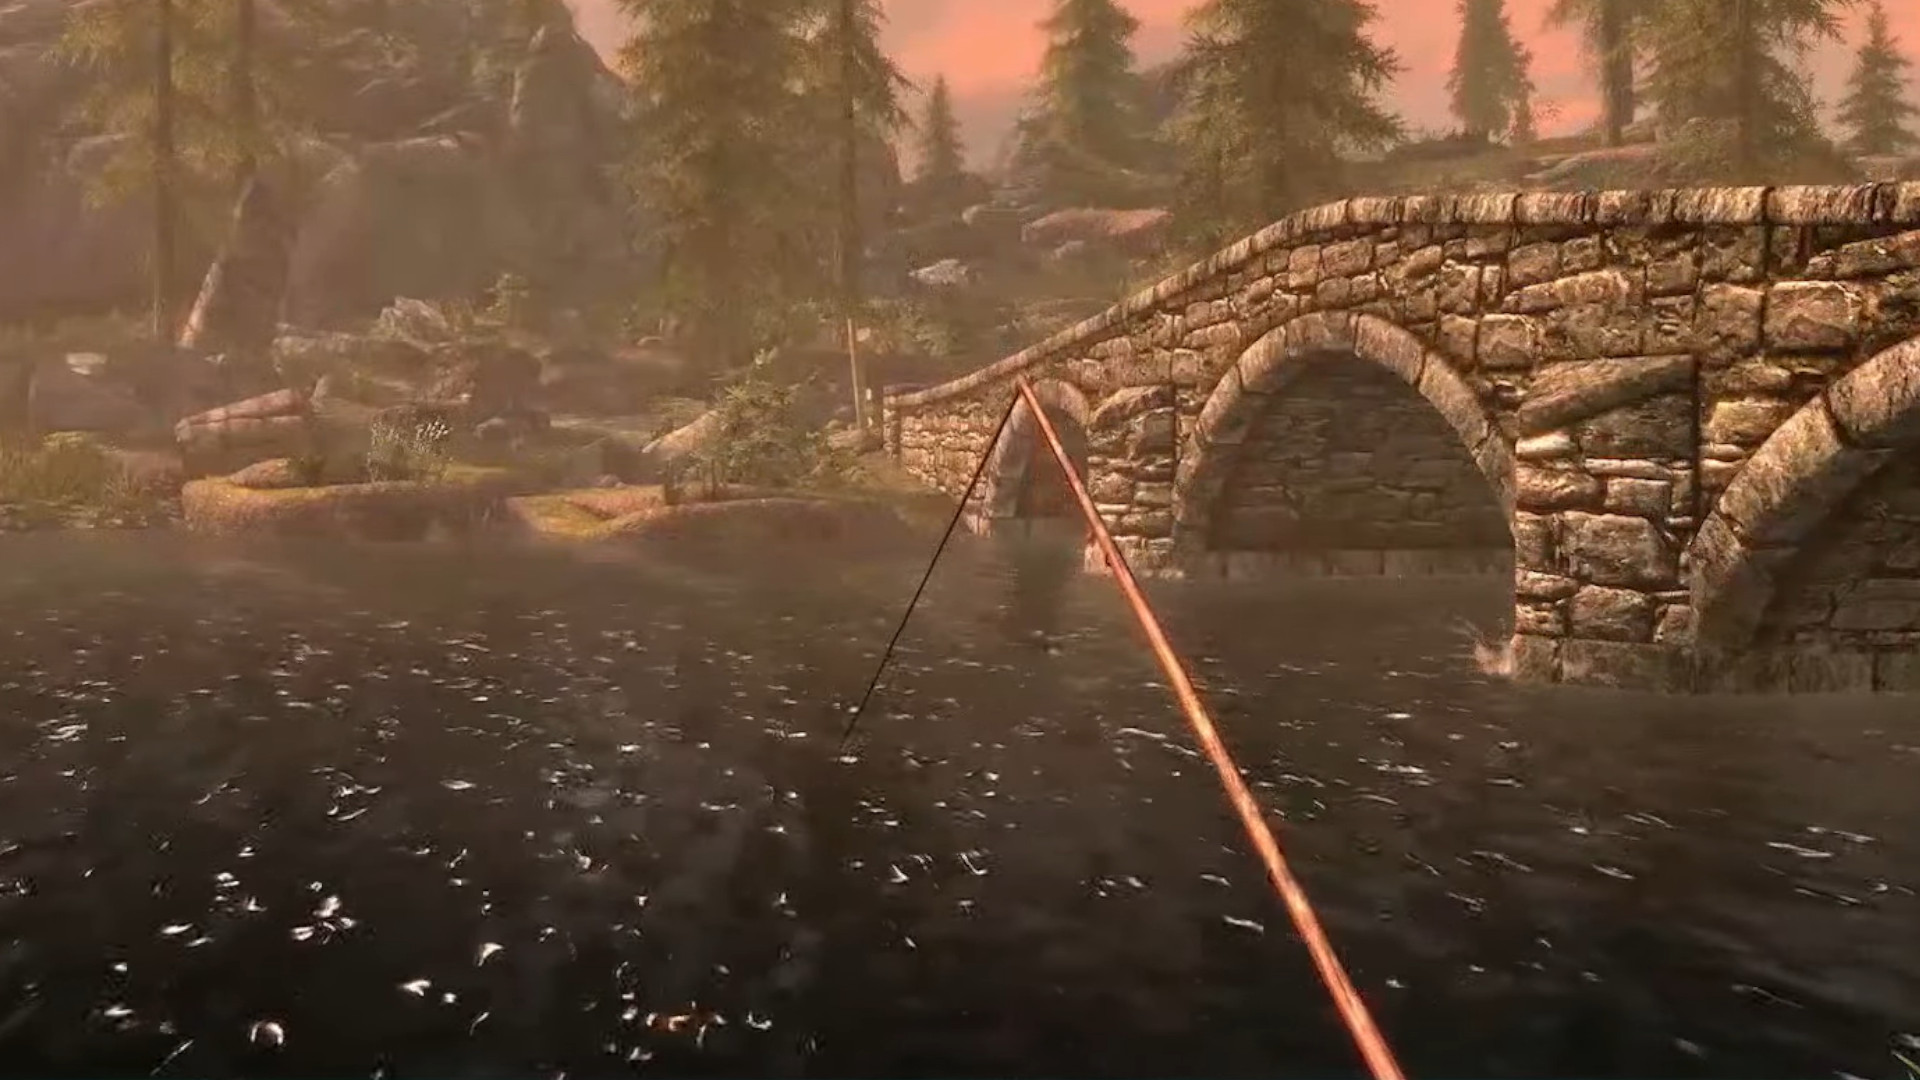 Skyrim gets a free anniversary update with fishing